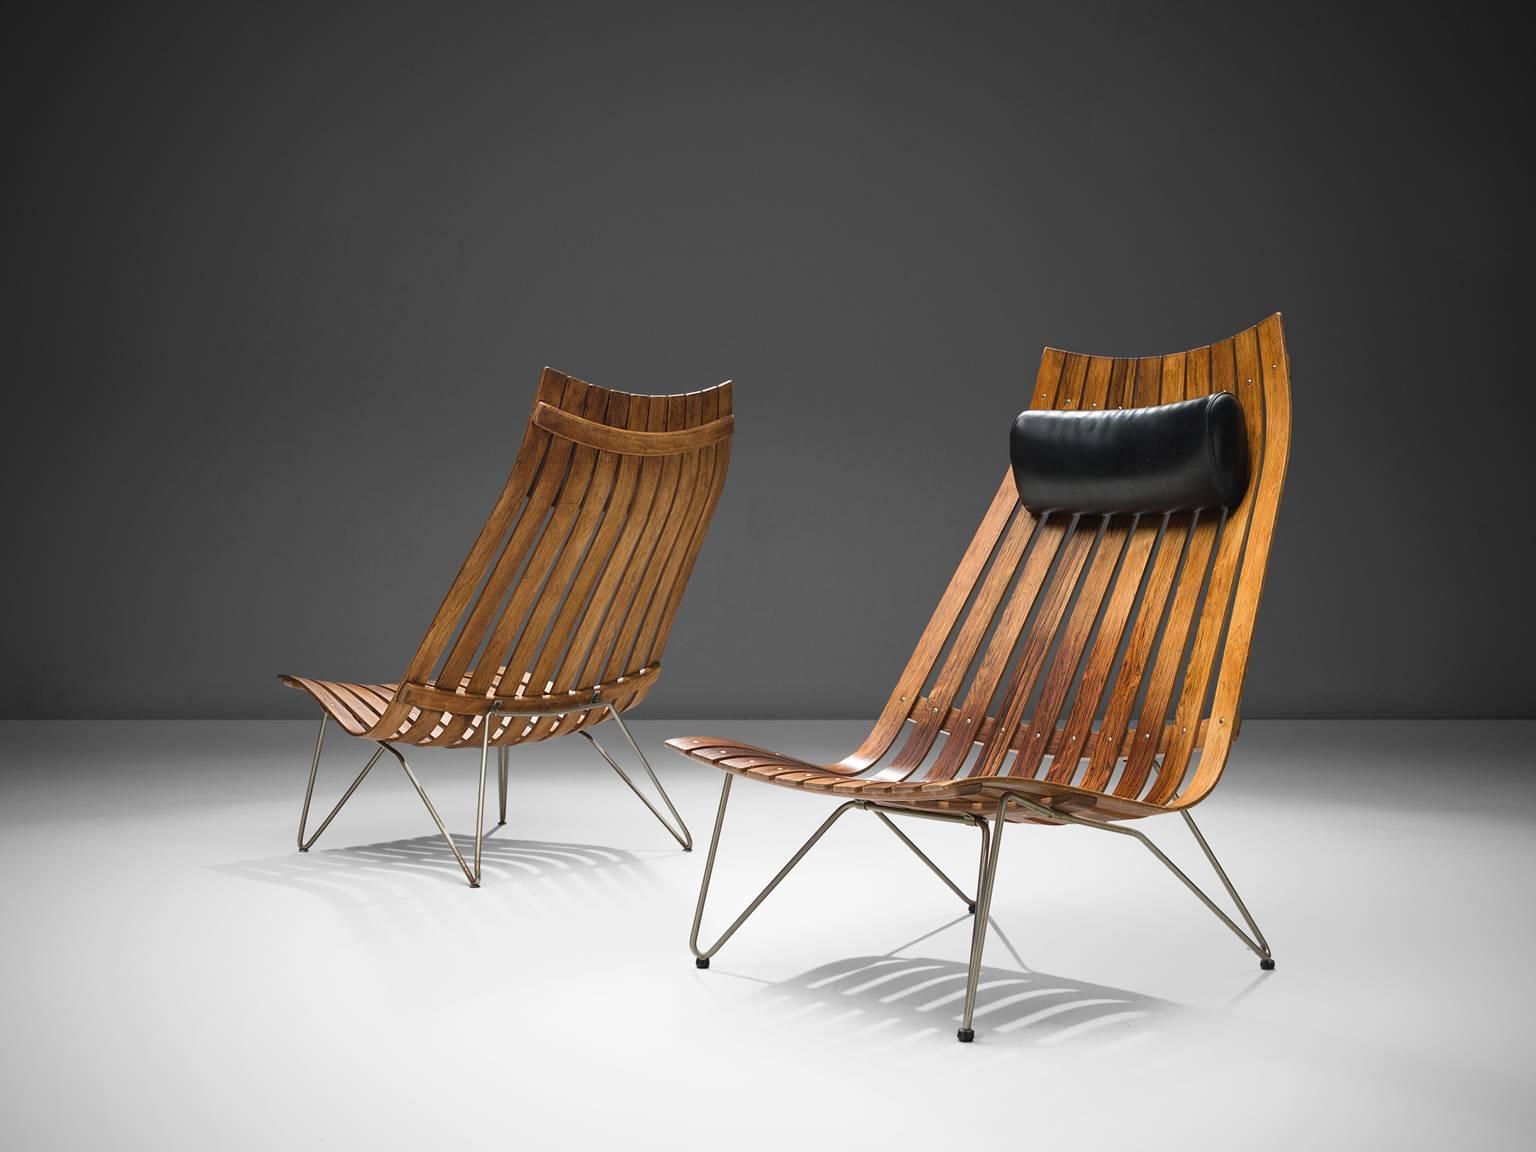 Hans Brattrud for Hove Mobler, lounge chairs model 'Scandia' in rosewood and metal, Norway, circa 1957. 

This set of chairs was part of the Scandia series, designed by Norwegian designer Hans Brattrud and produced by Hove Mobler. The chairs are